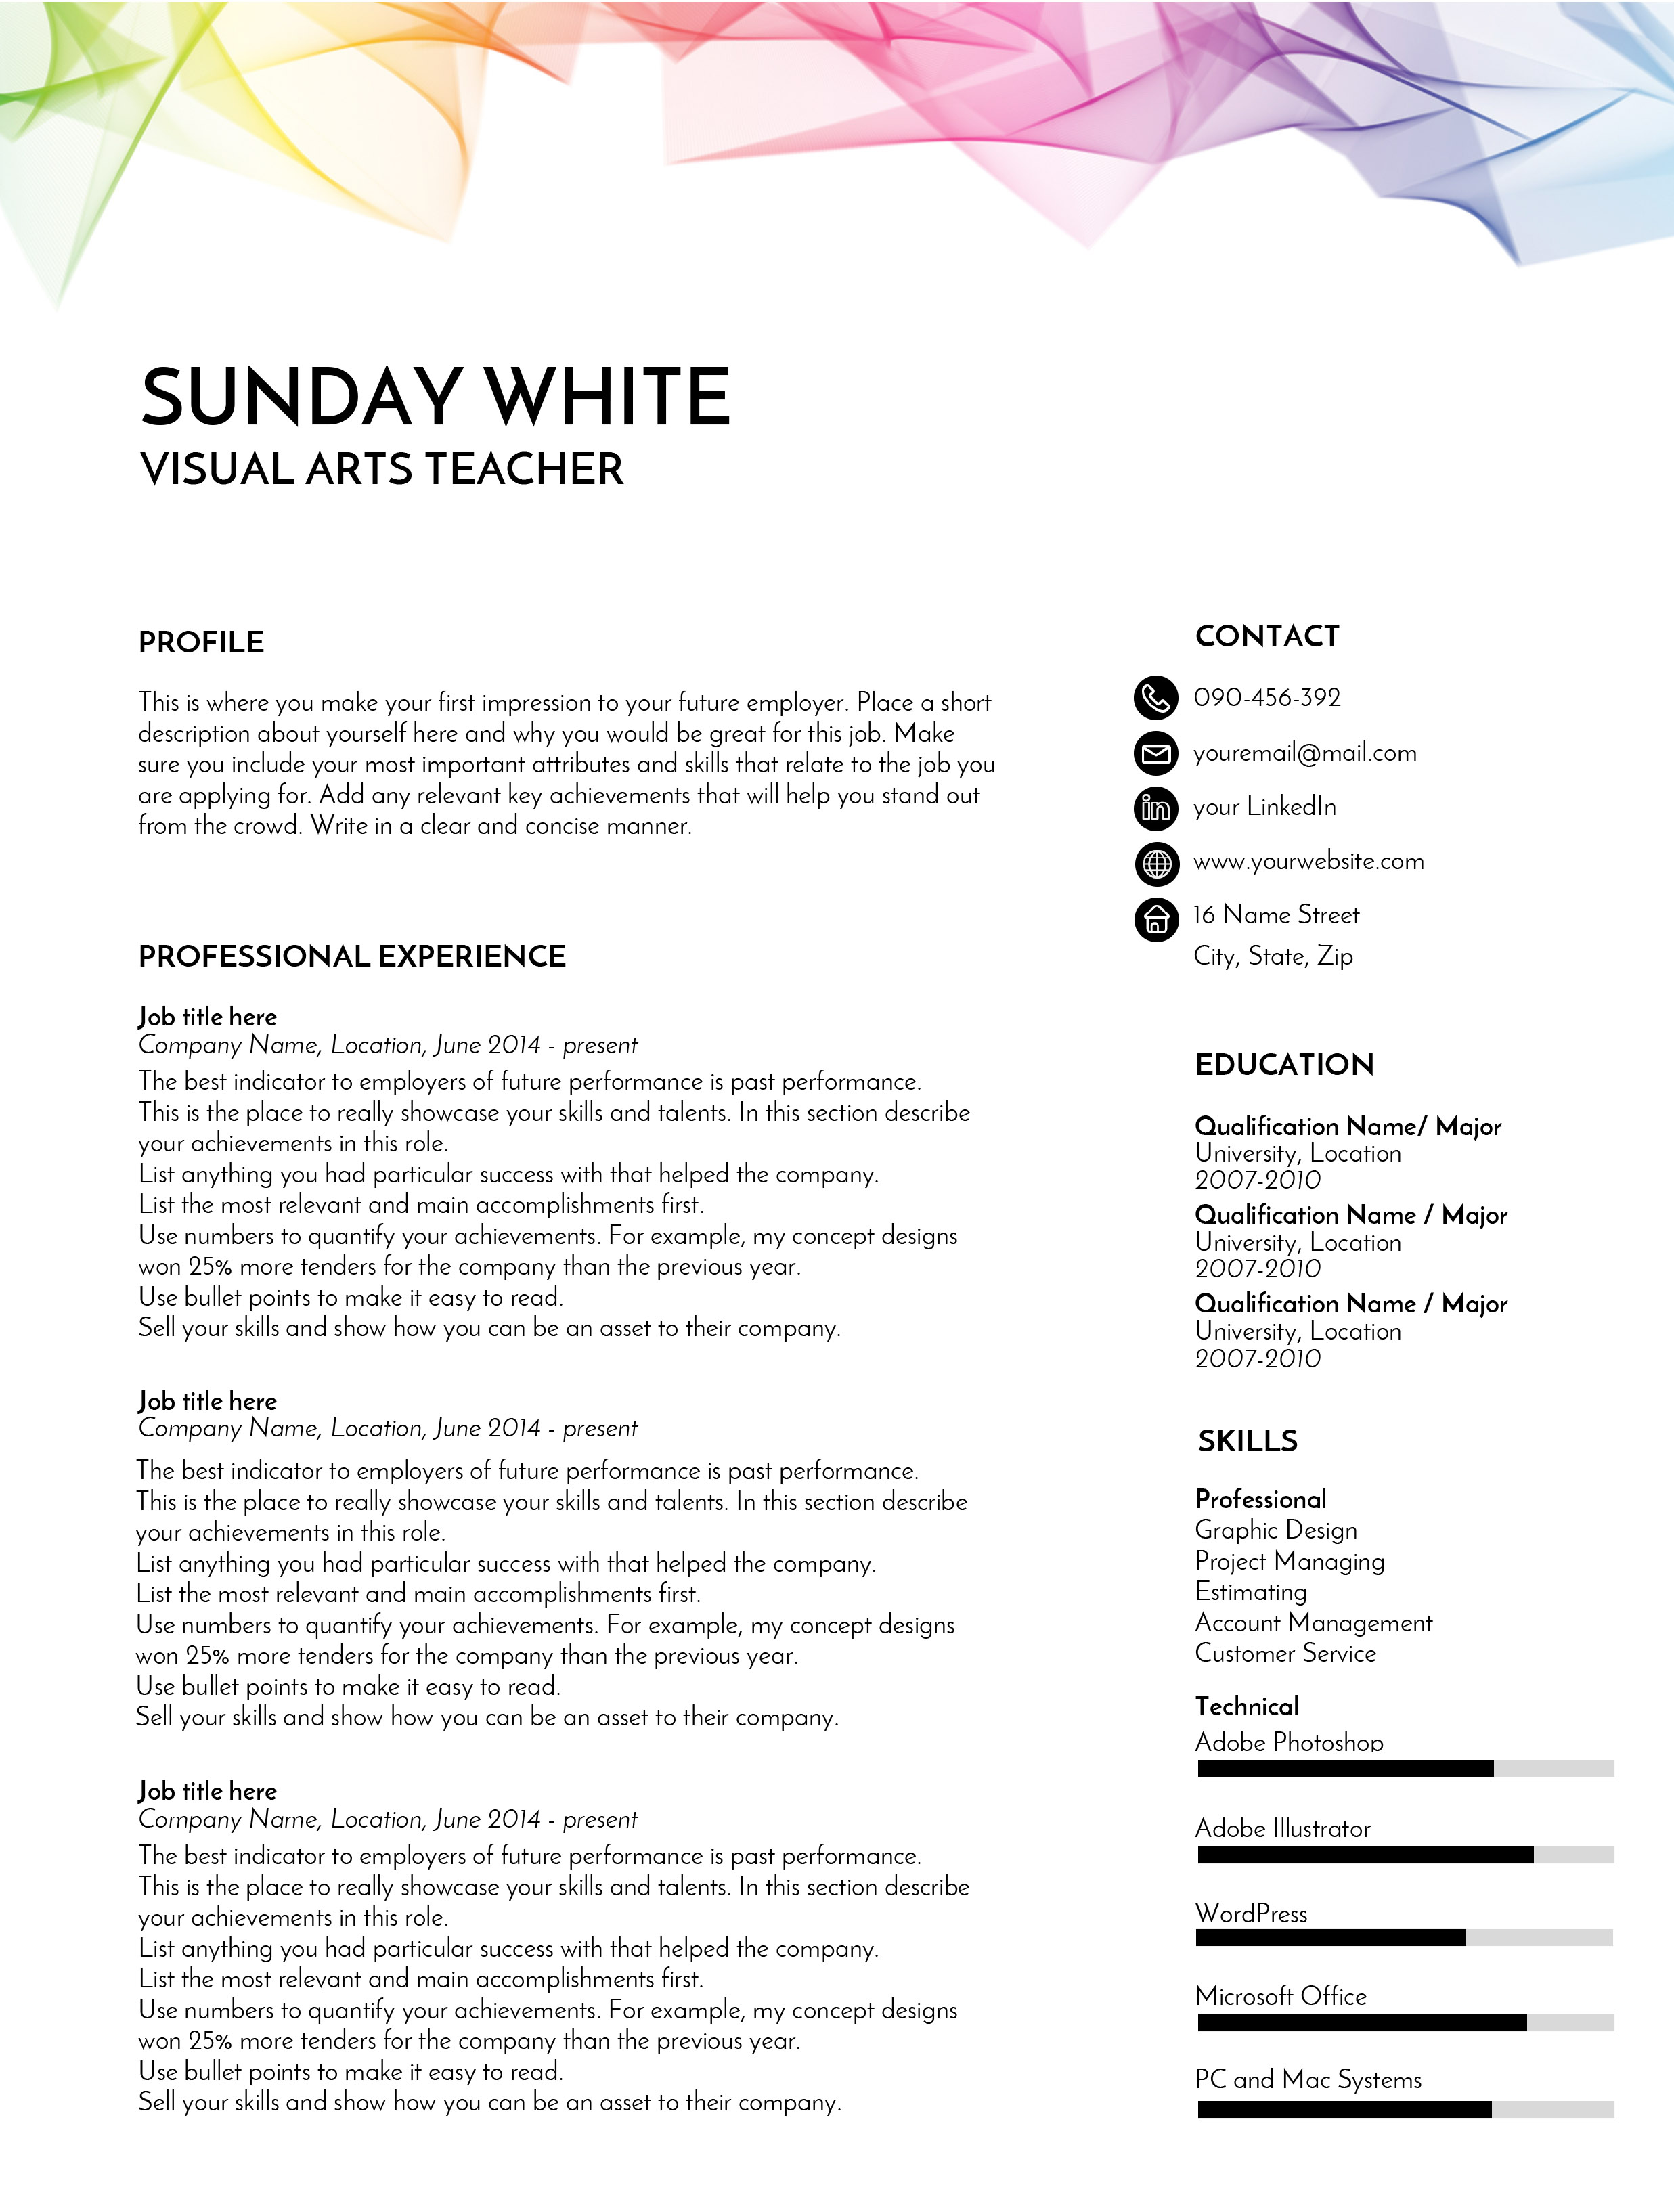 Resume Template Cv Template Cv Design Rainbow 98559 Resume Images And 